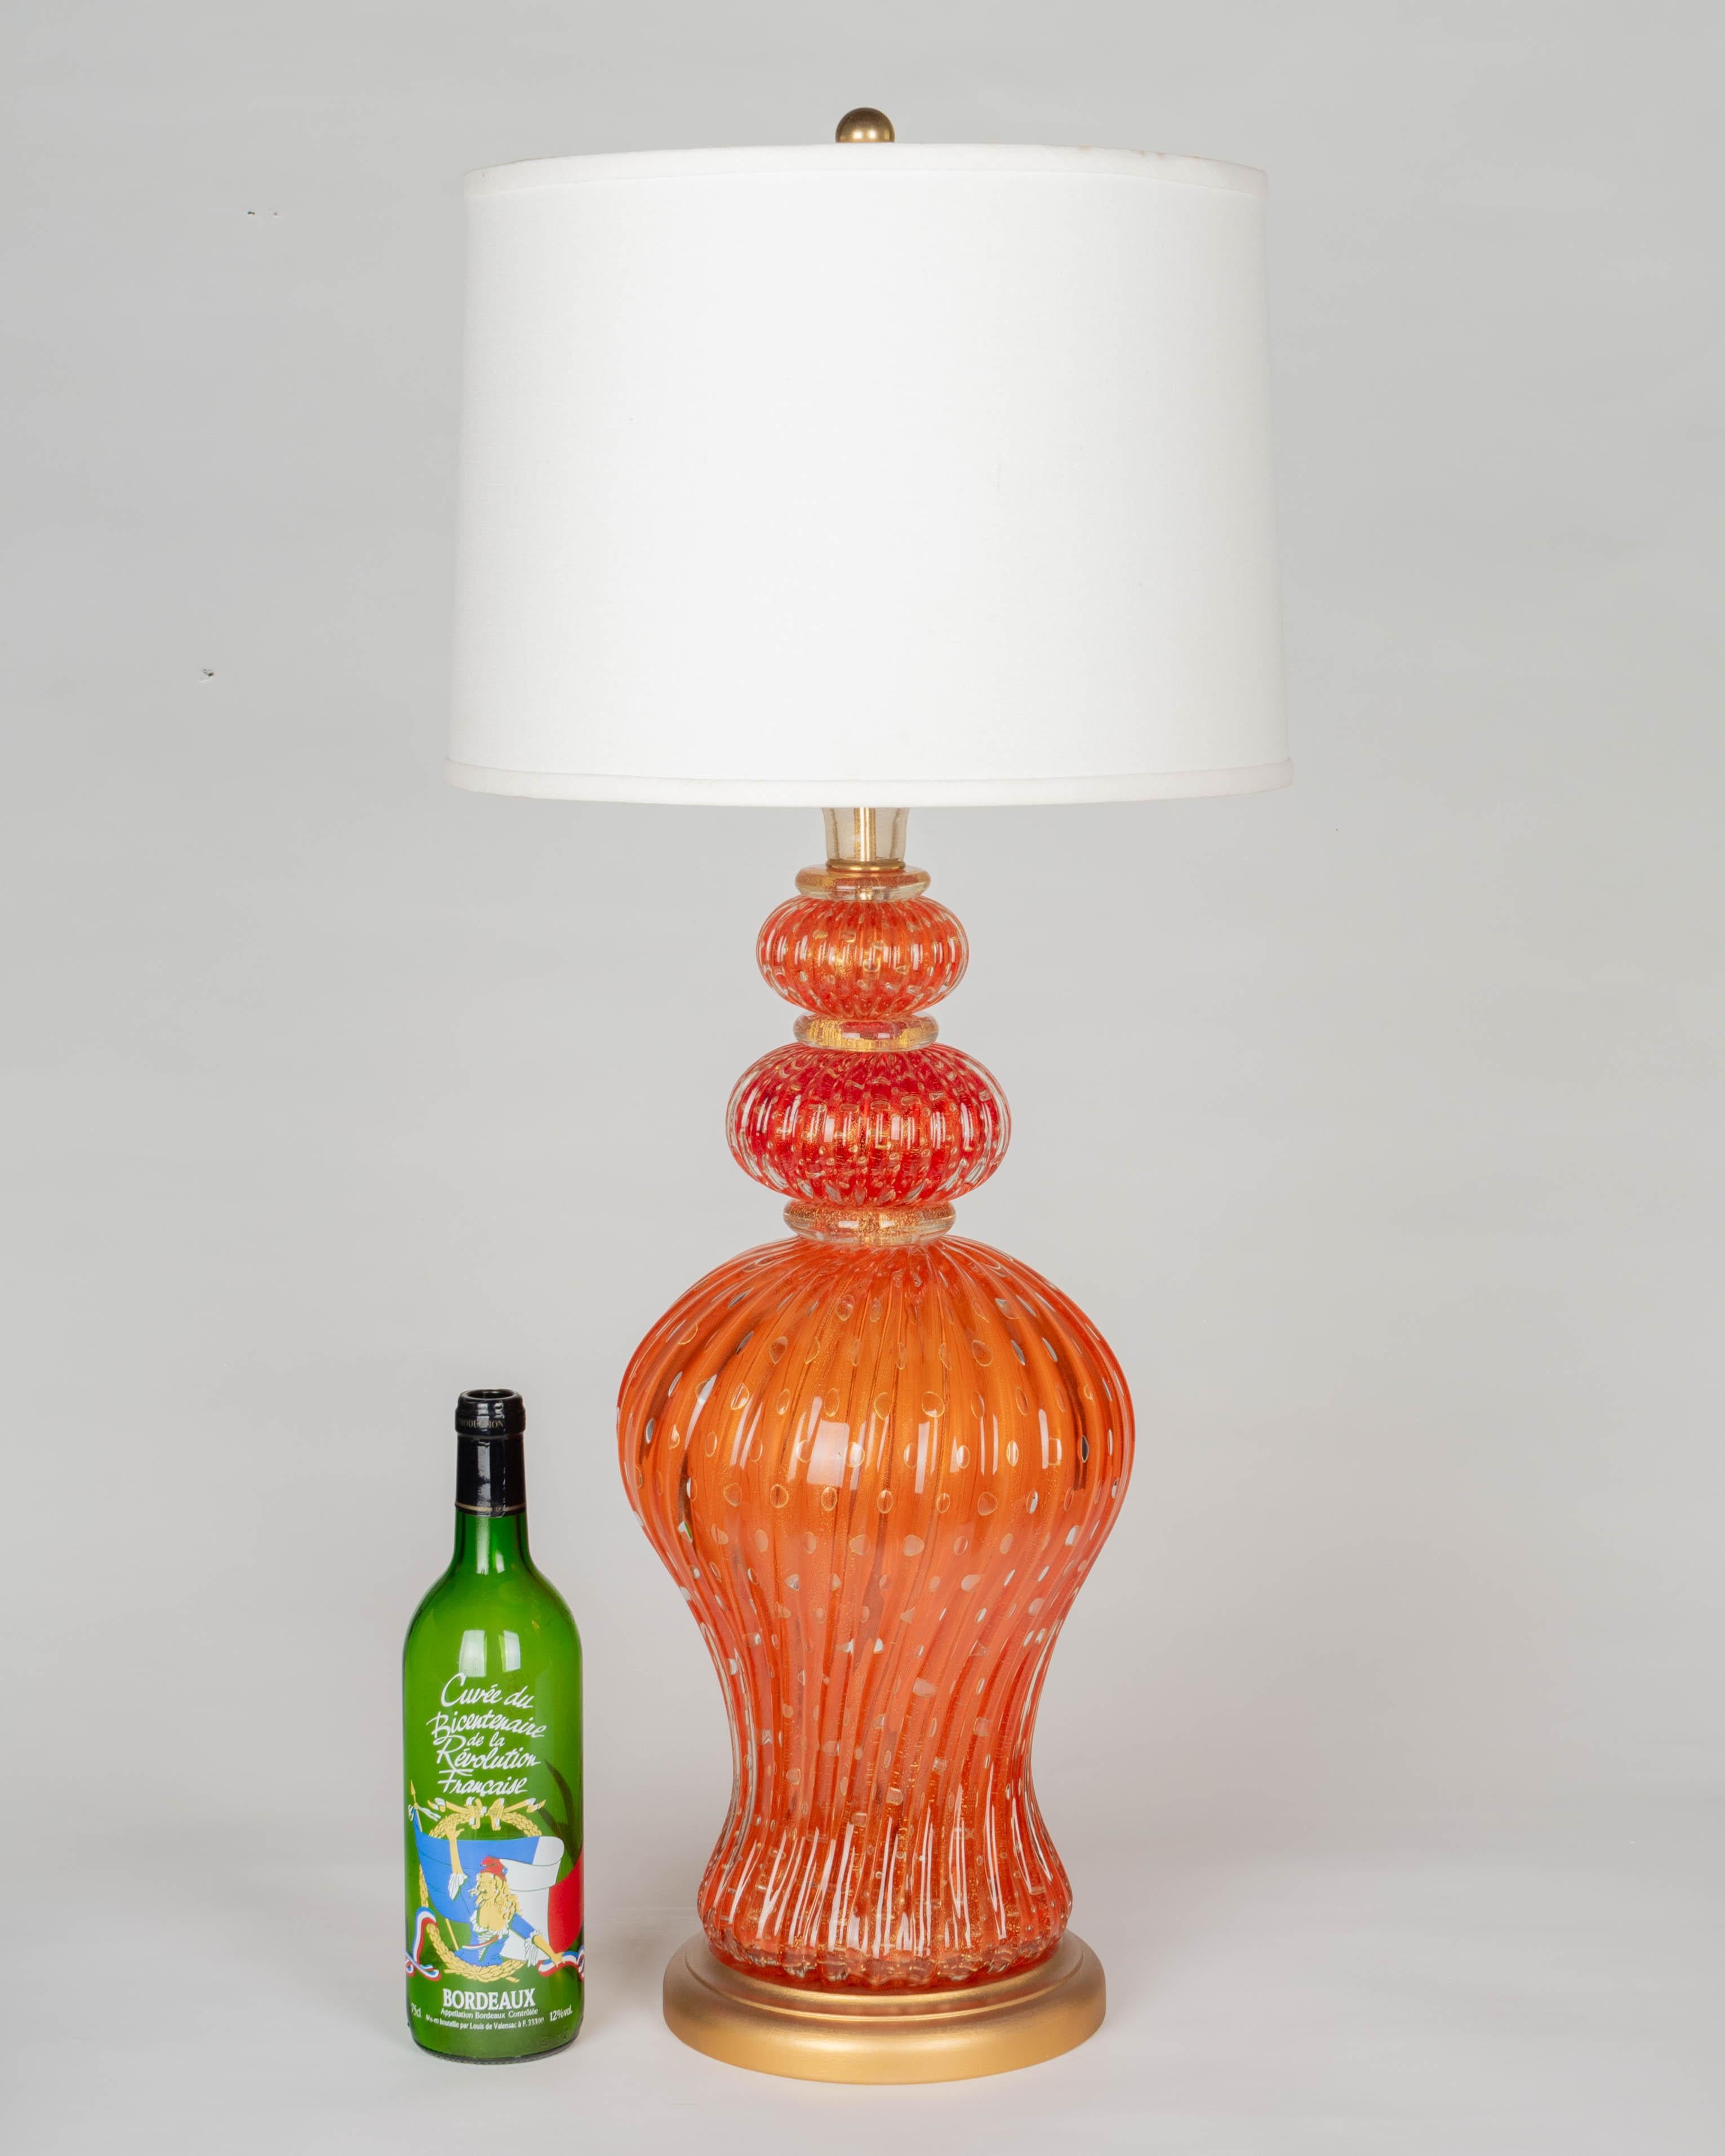 A large Mid Century Murano glass lamp by Barovier & Toso. Hand-blown orange ribbed glass with real gold leaf inclusions and controlled bubbles. Large urn form body with two stacked glass tiers and gold neck. Rare color! New gilt wood base. Rewired